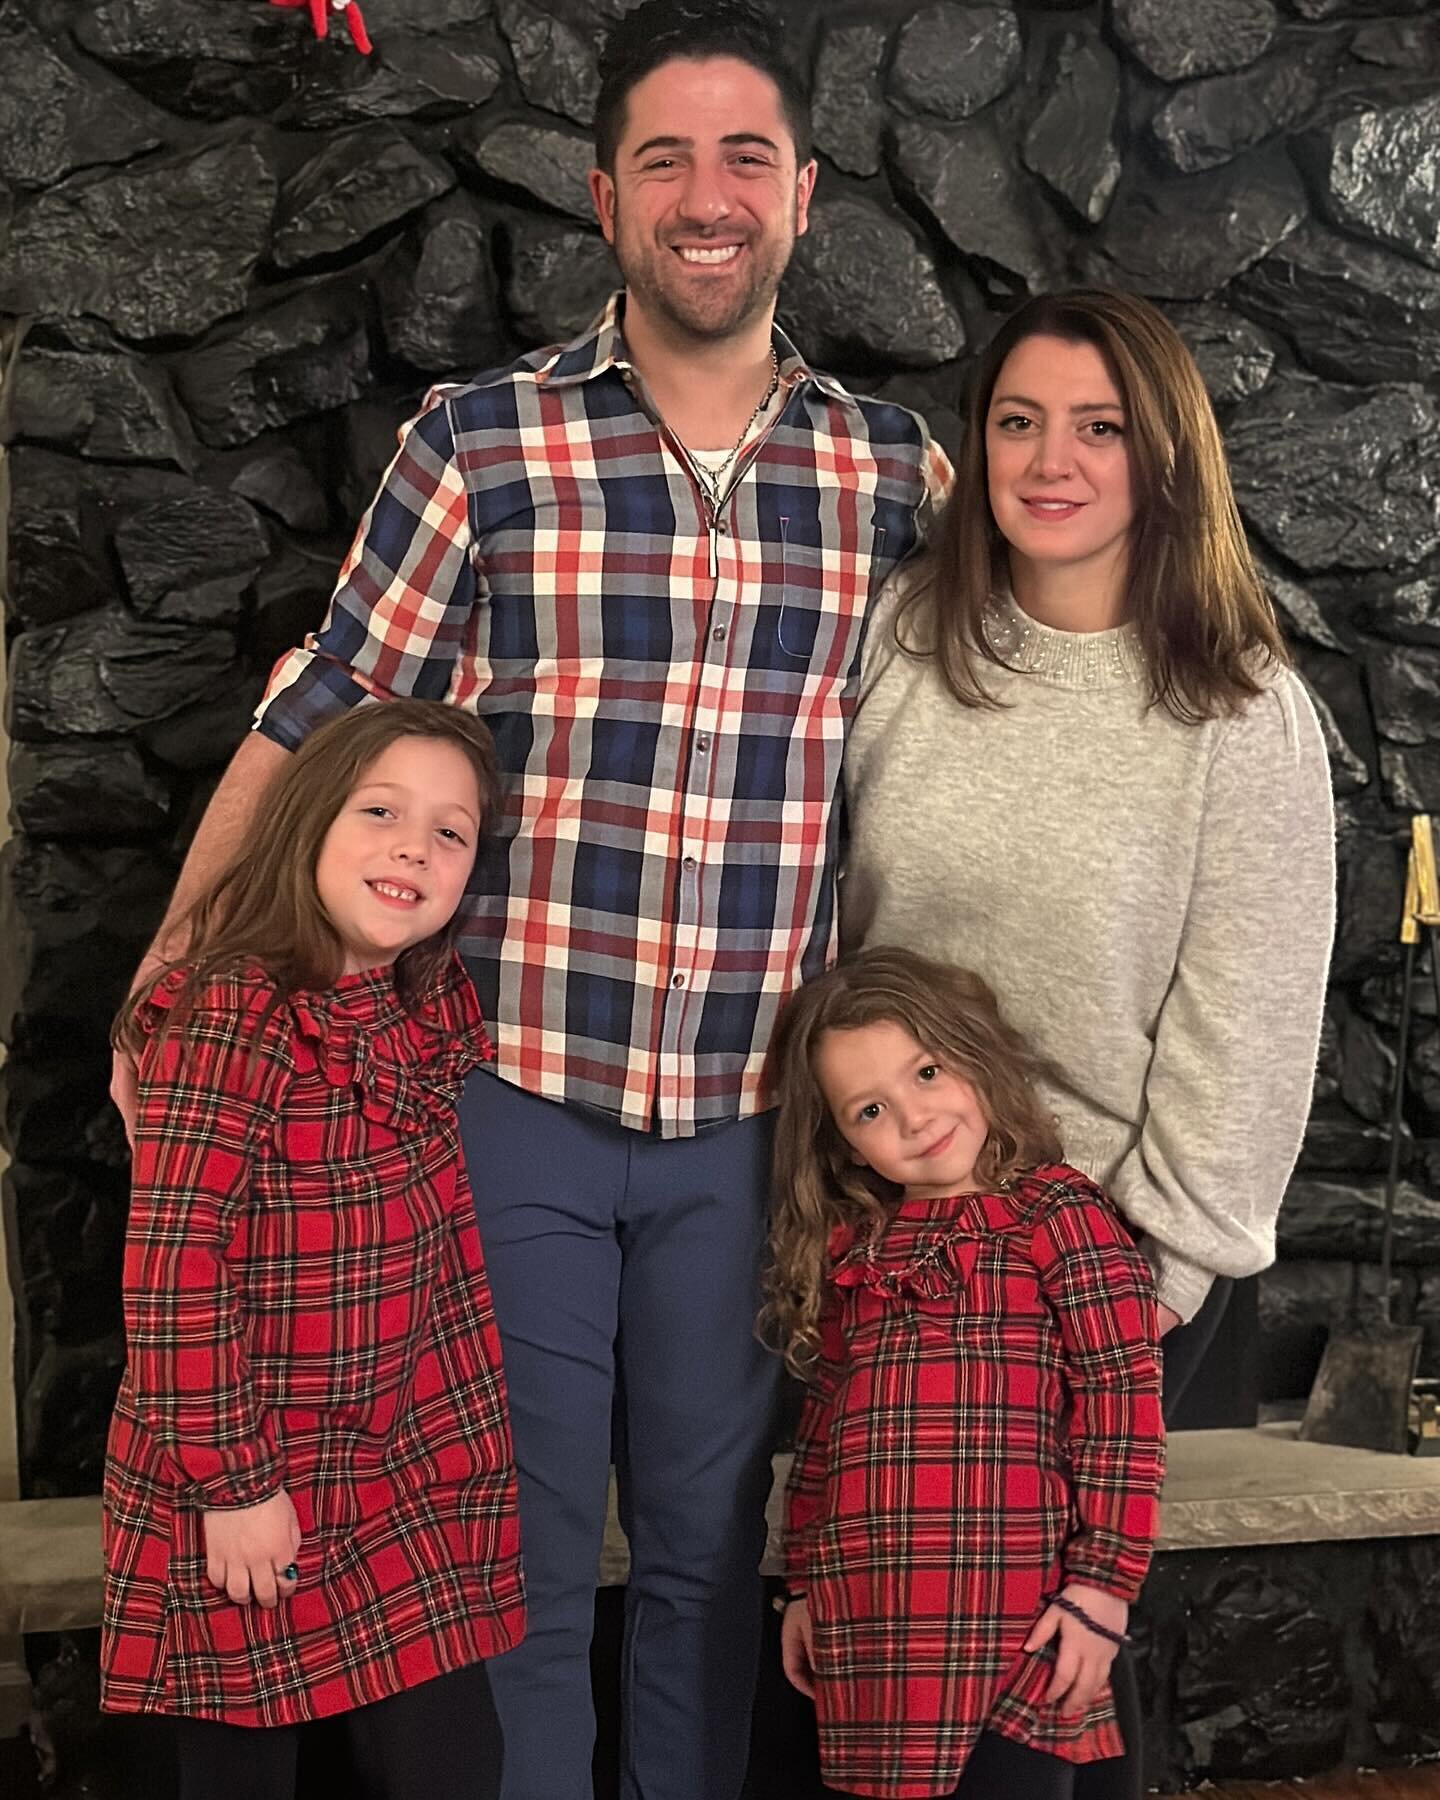 And just like that, Christmas 🎄turned into New Years 🎆.

Thankful for a family that works hard and finds a way to be together. Blessed to have all my girls healthy and safe with me. Hopeful for a new year with adventures, happiness and peace 🙏

A 